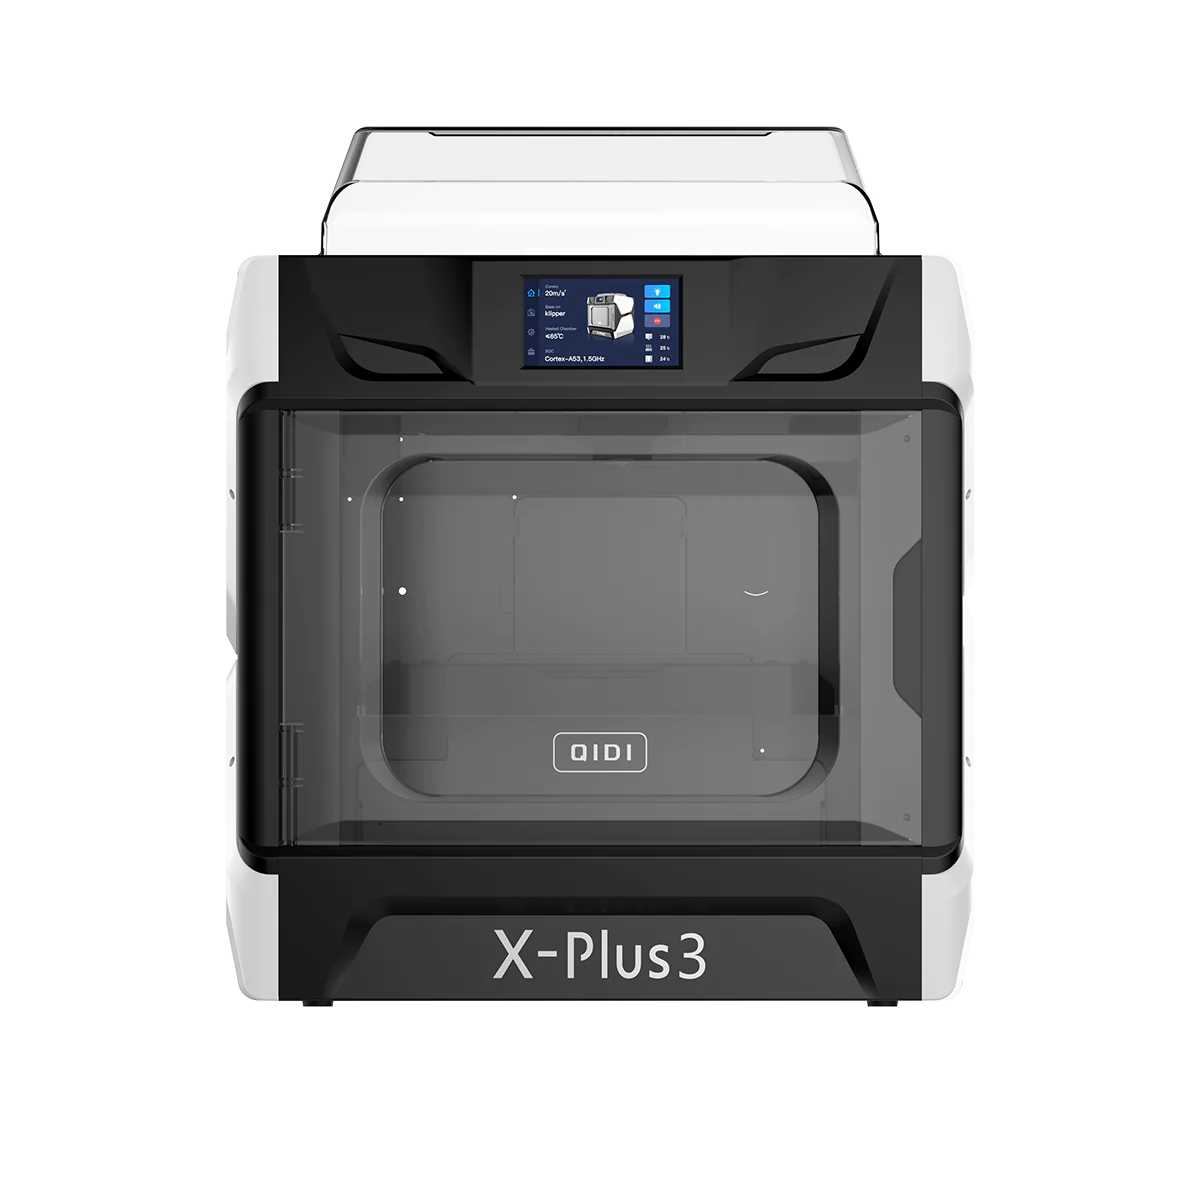 QIDI TECH X-PLUS 3 3D Printers Fully Upgrade, 600mm/s Industrial Grade High-Speed 3D Printer, Acceleration 20000mm/s2, 65℃ Independent Heated Chamber, Core XY & Klipper, 11.02x11.02x10.63 inch